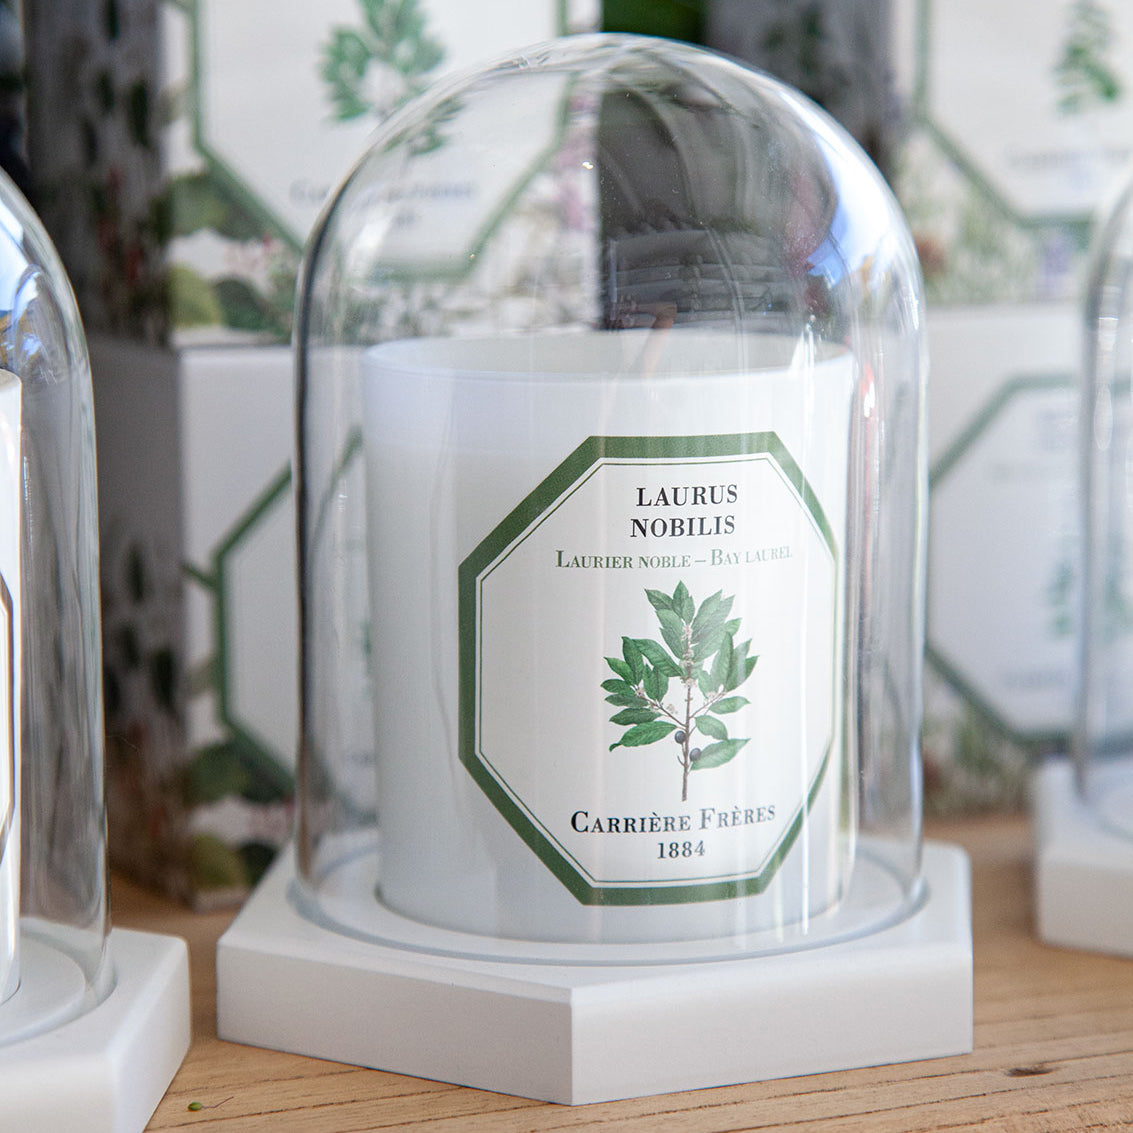 Carriere Freres Laurel Candle with candle dome.